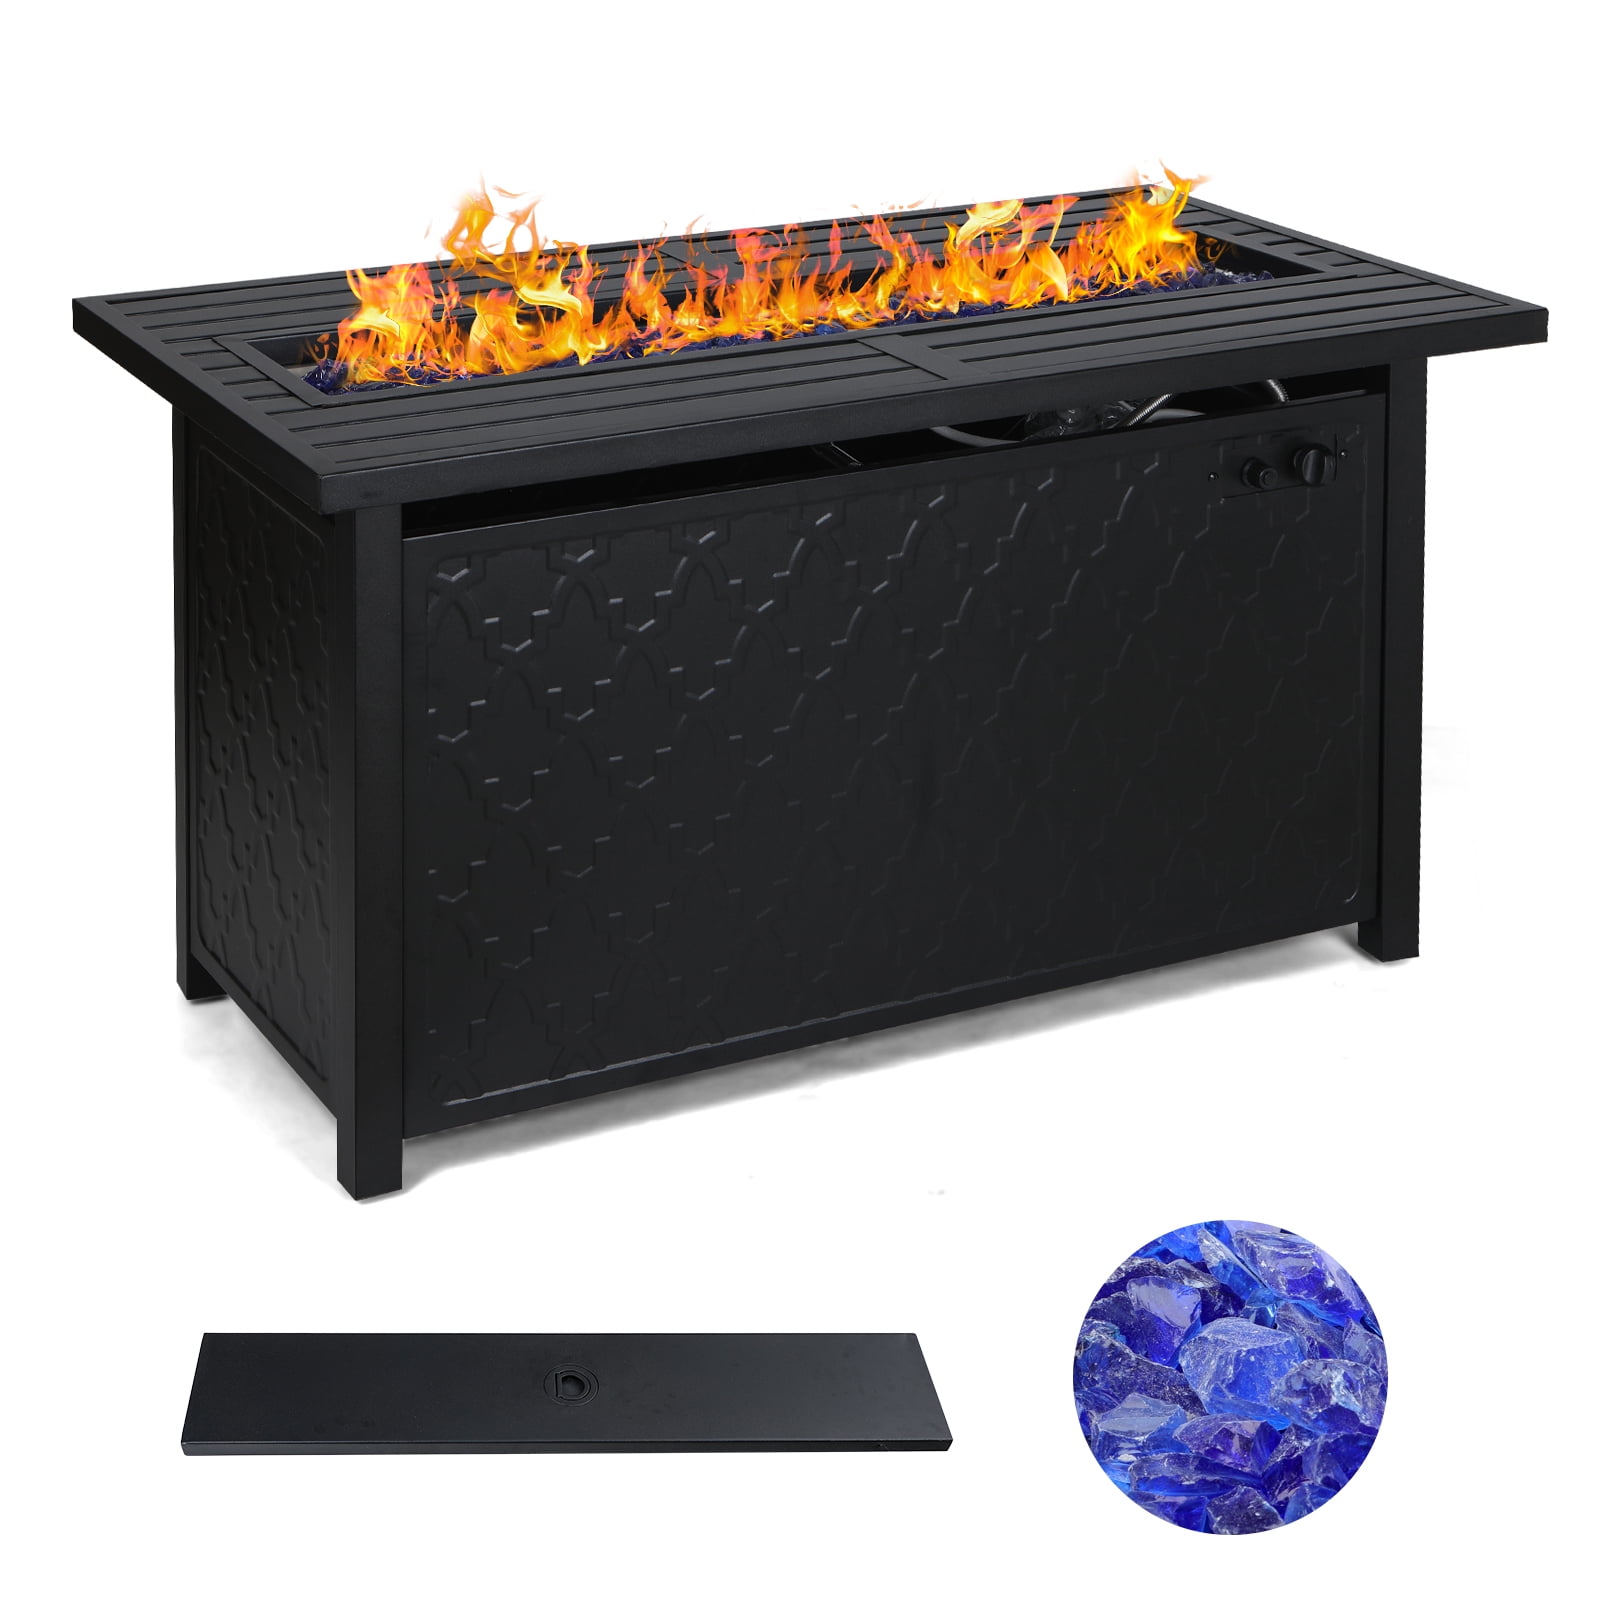 Mf Studio 45 50000but Propane Fire Pit, Fire Pit Table With Lid